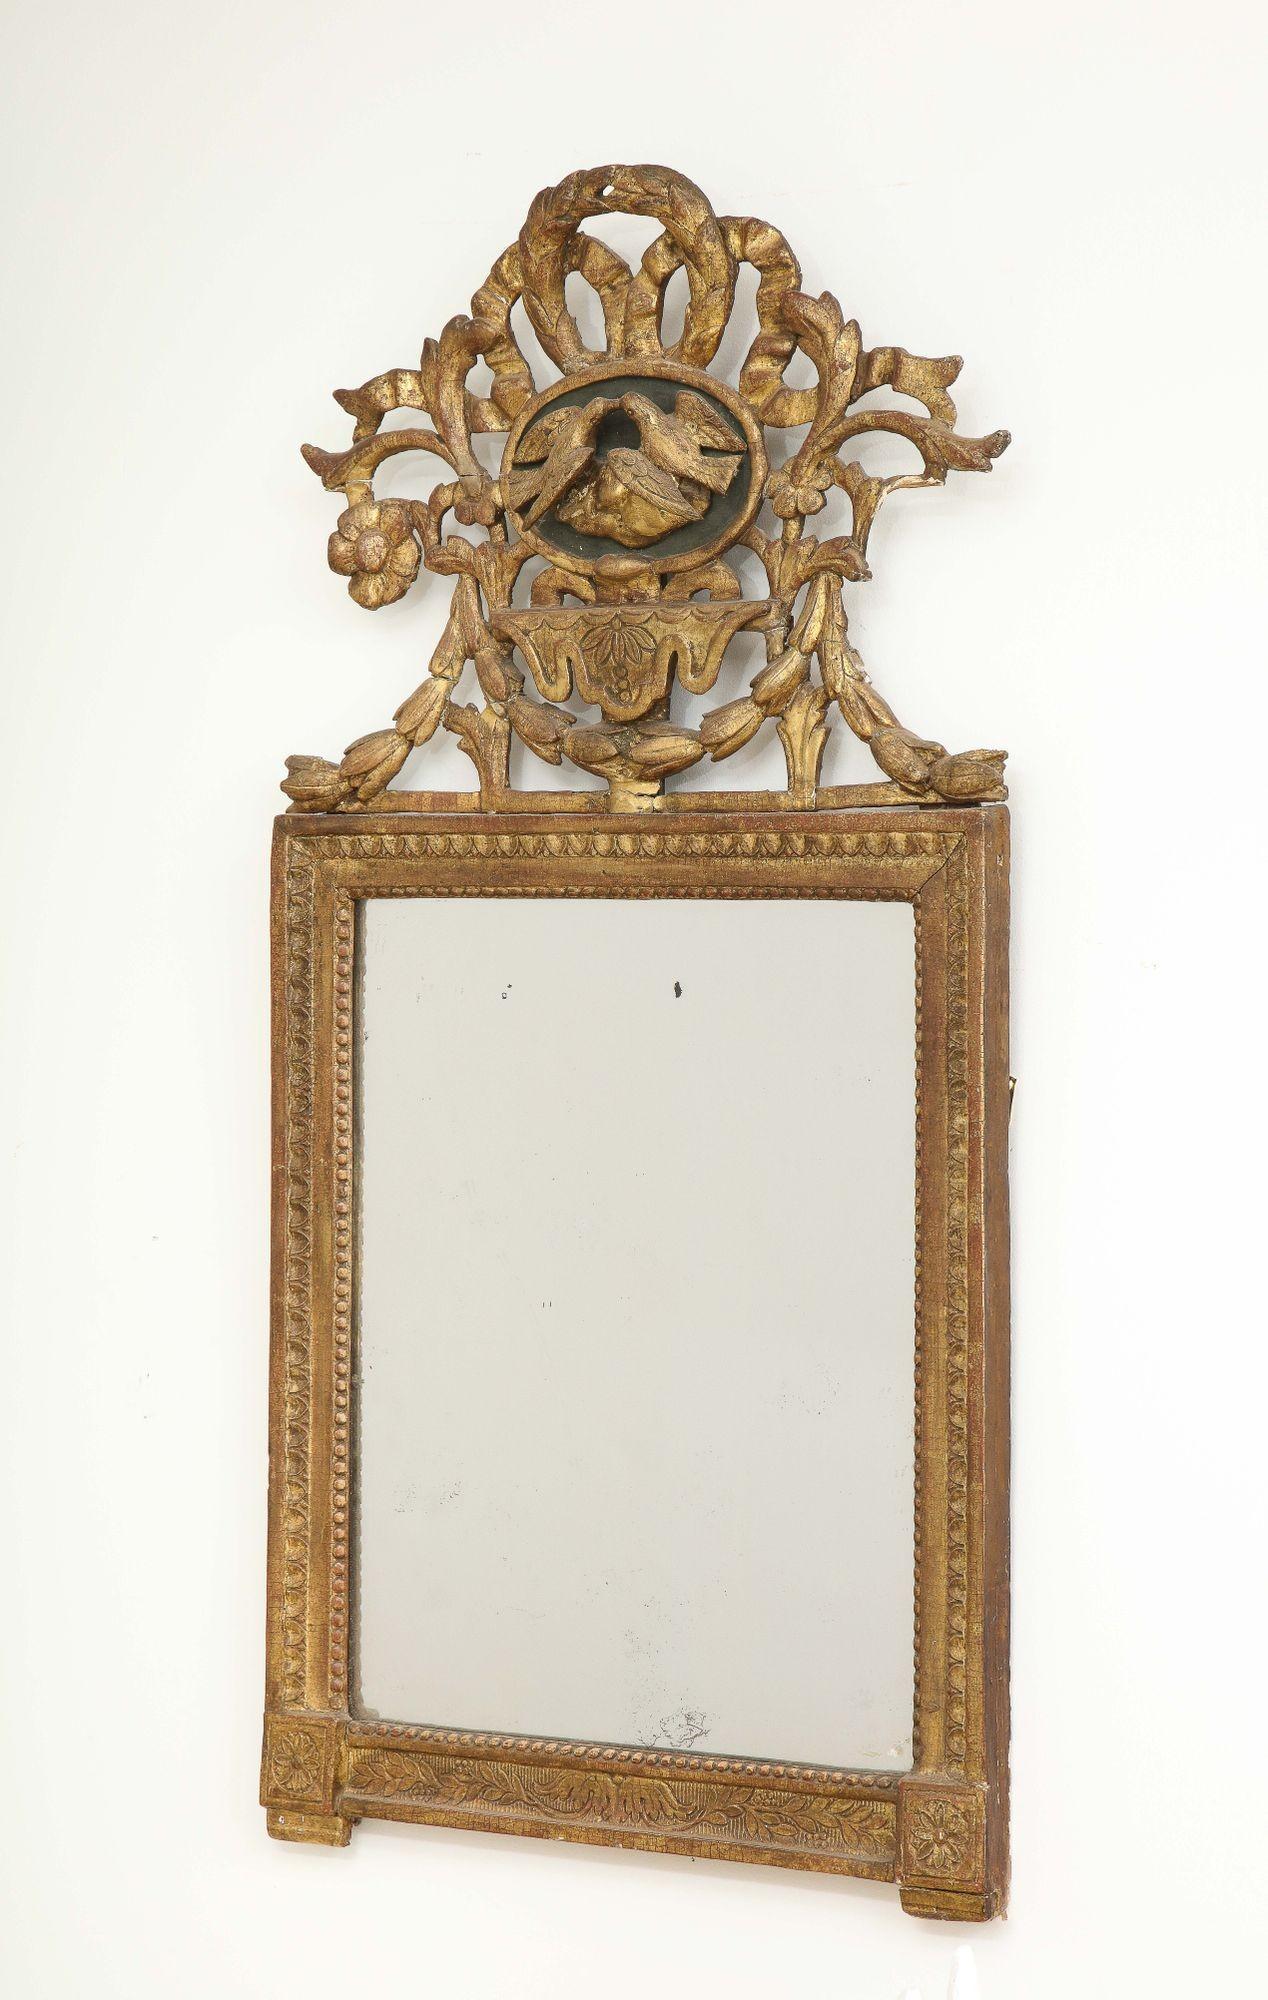 French carved giltwood mirror with ornately carved lovebird crown. Late 19th century. Minor losses and oxidation on the mirror plate.